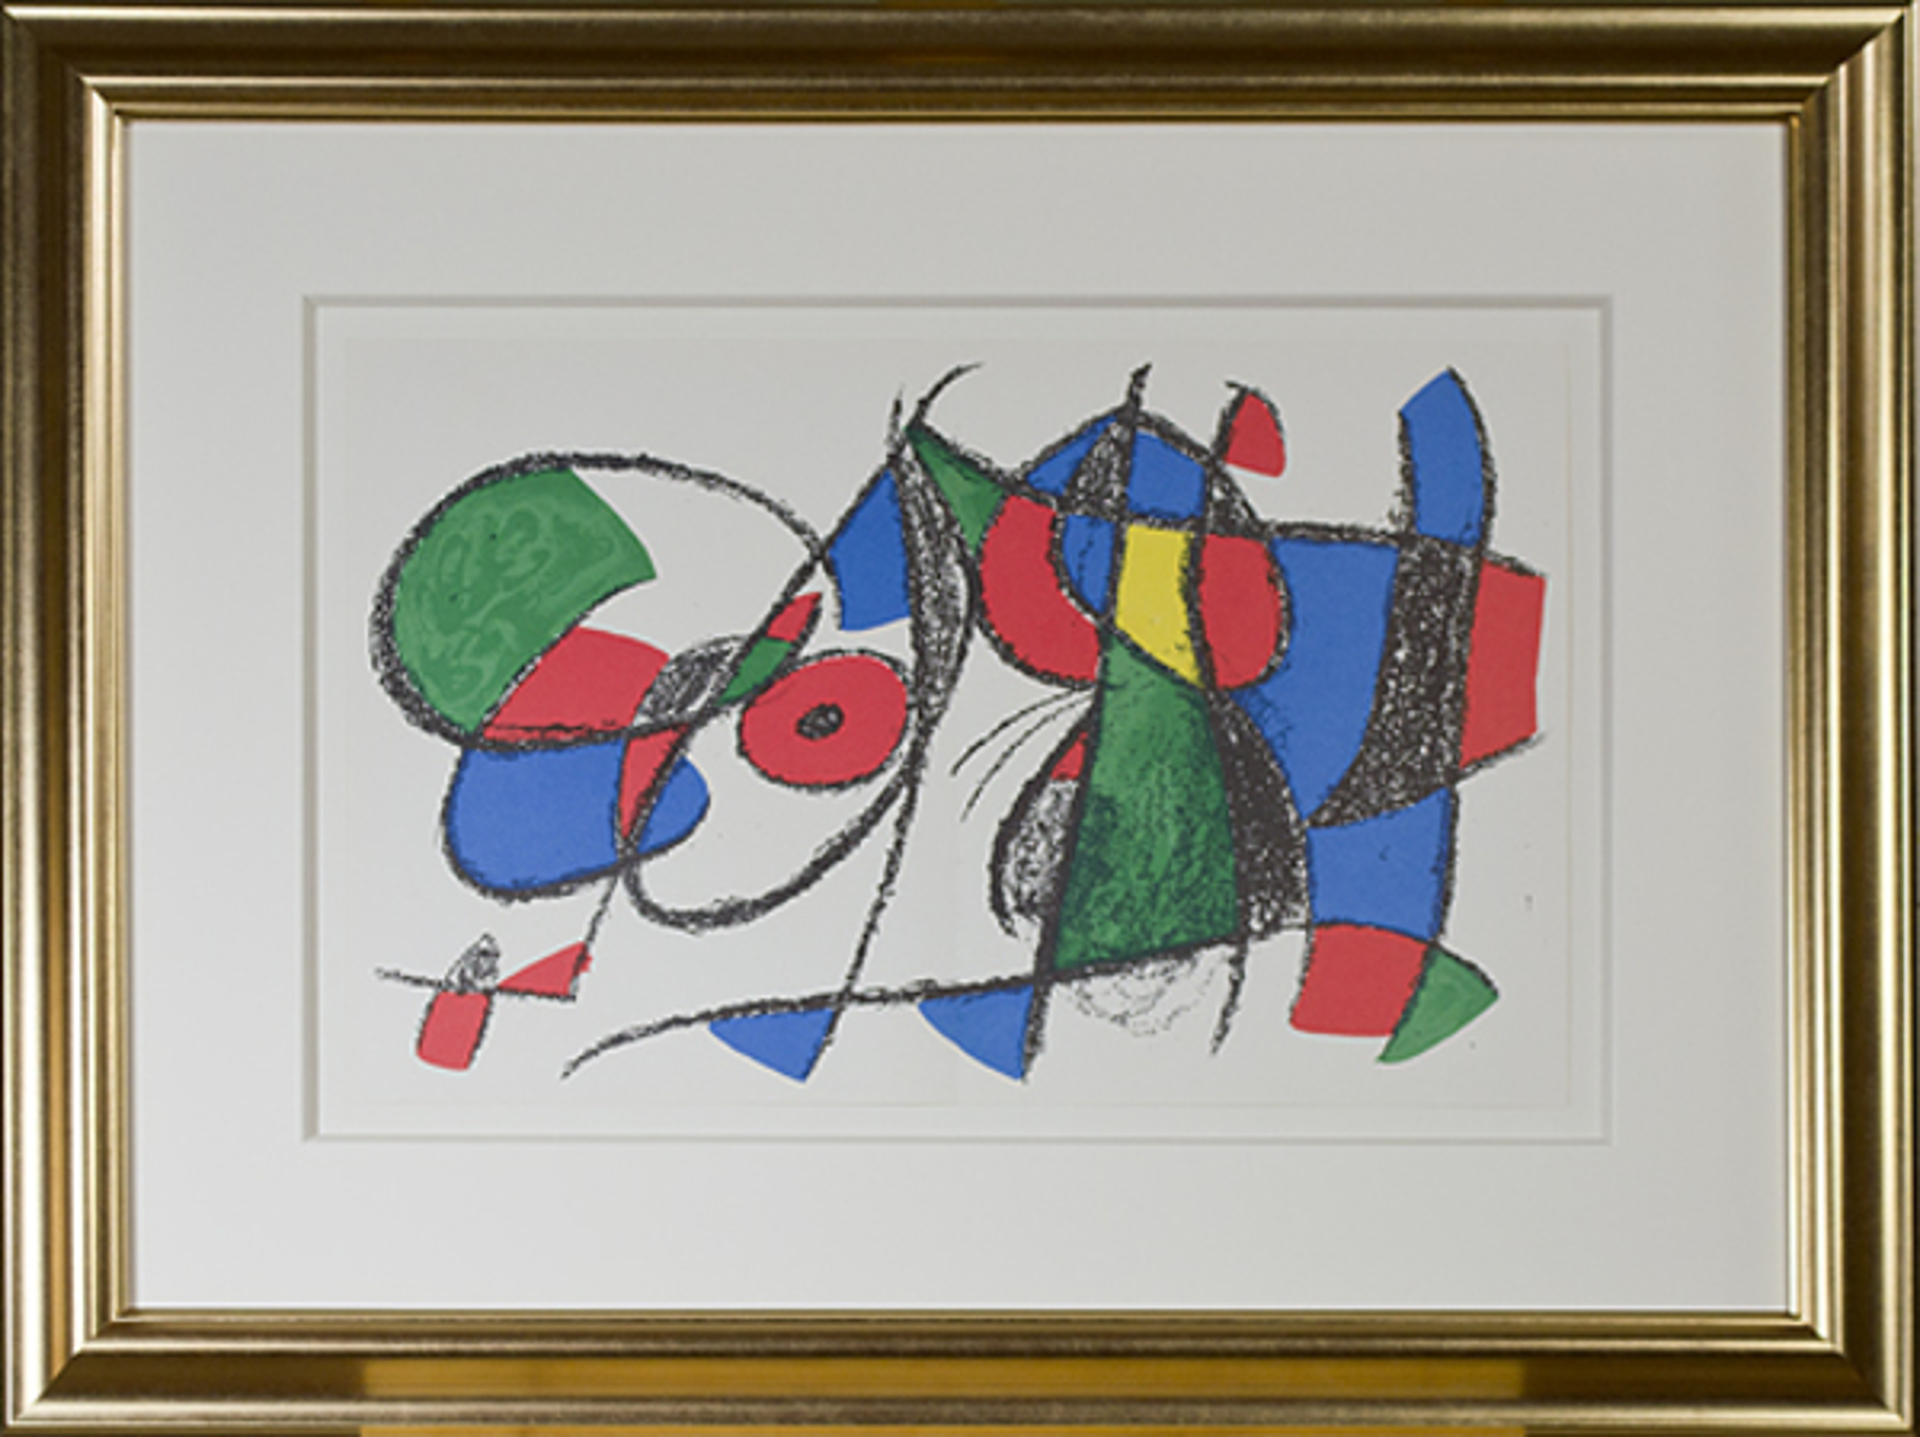 Original Lithograph VIII from "Miro Lithographs II, Maeght Publisher" by Joan Miró